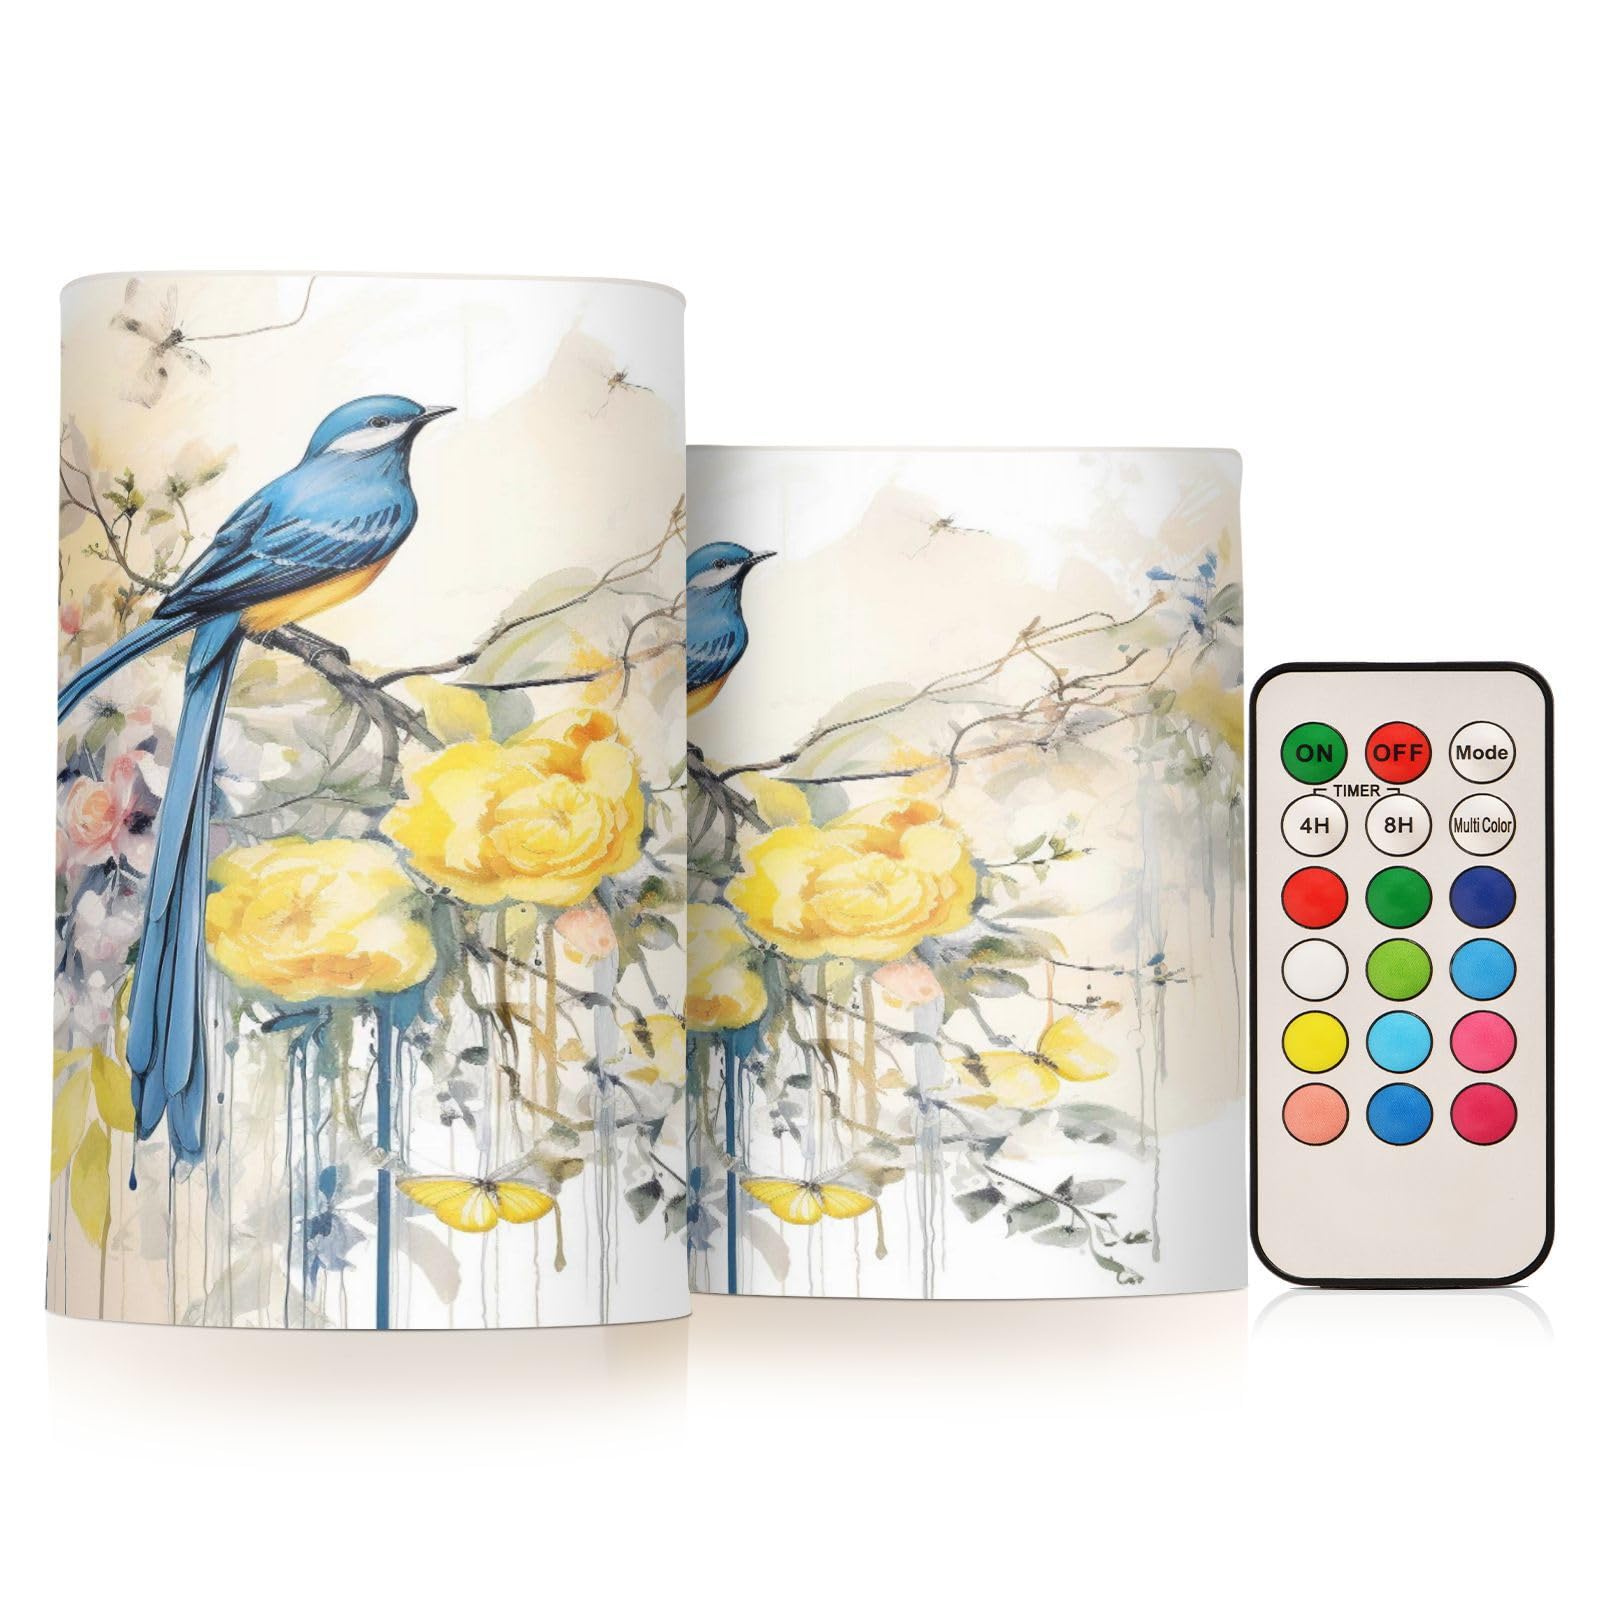 Spring Blue Bird with Yellow Flowers Butterflies Flickering Flameless Candles Battery Operated with Remote Timer,Tea Light Candles LED Pillar Votive Candles set of 2 for Outdoor Indoor Decorations